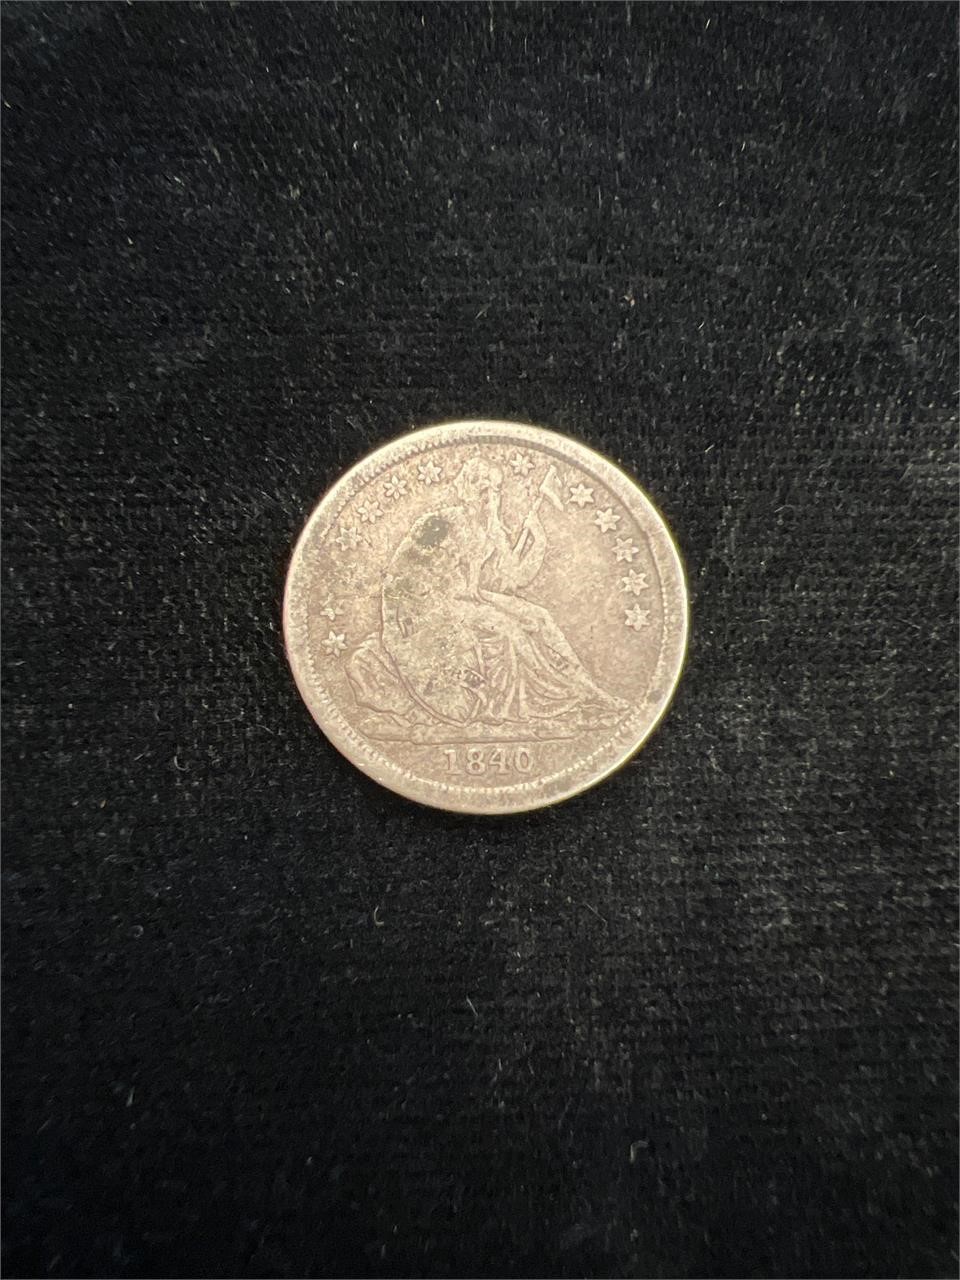 1840 Seated Liberty Dime with Arrows